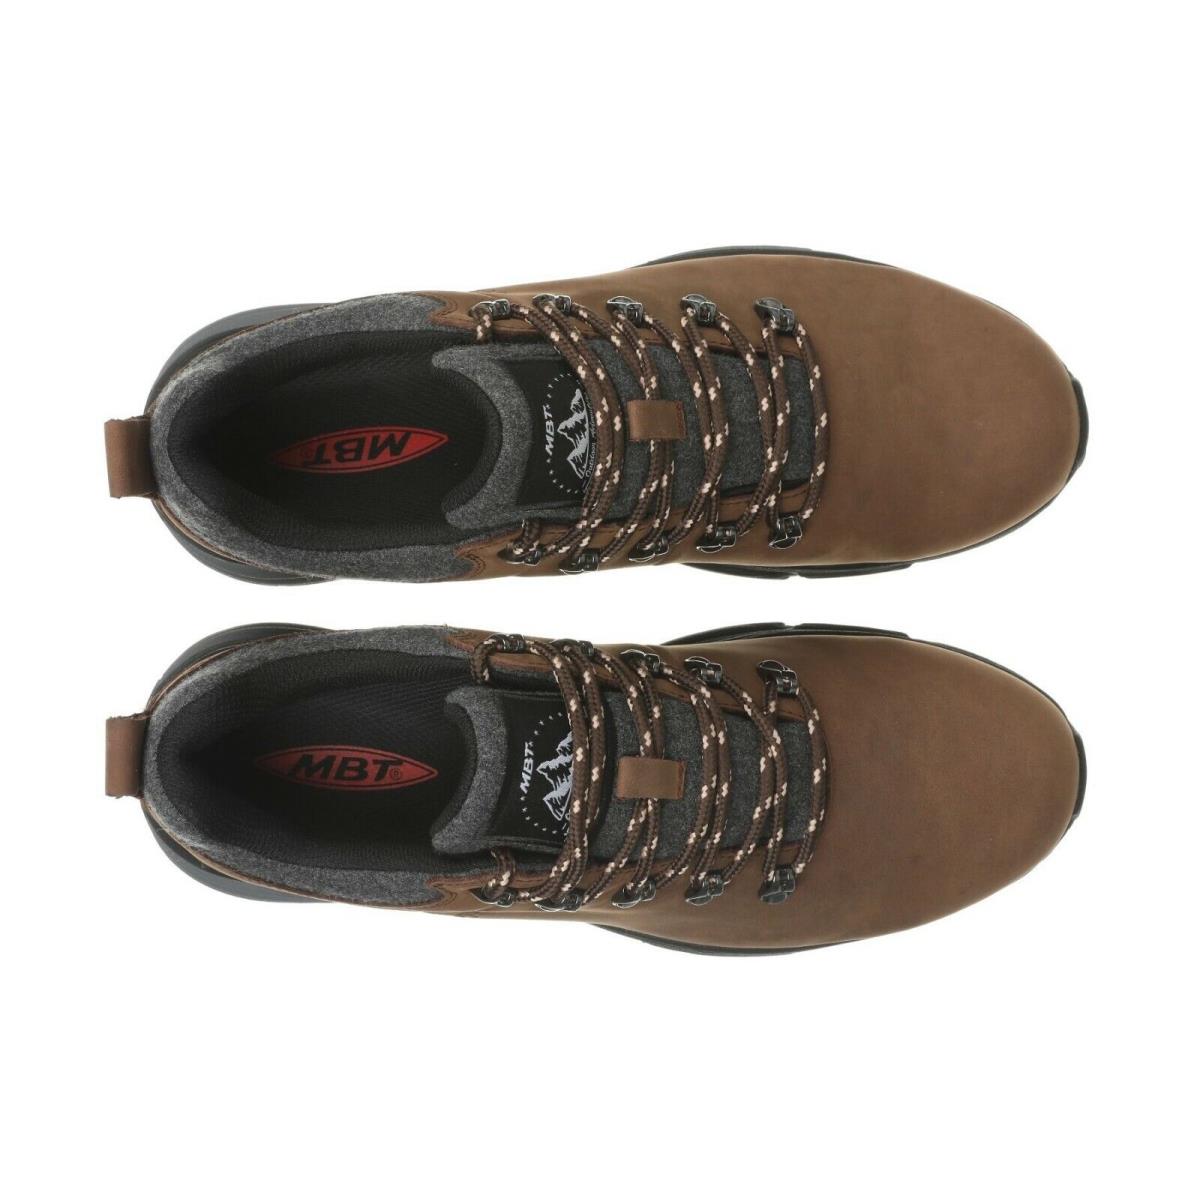 MBT shoes ALPINE - CHOCOLATE BROWN-GORE-TEX 4